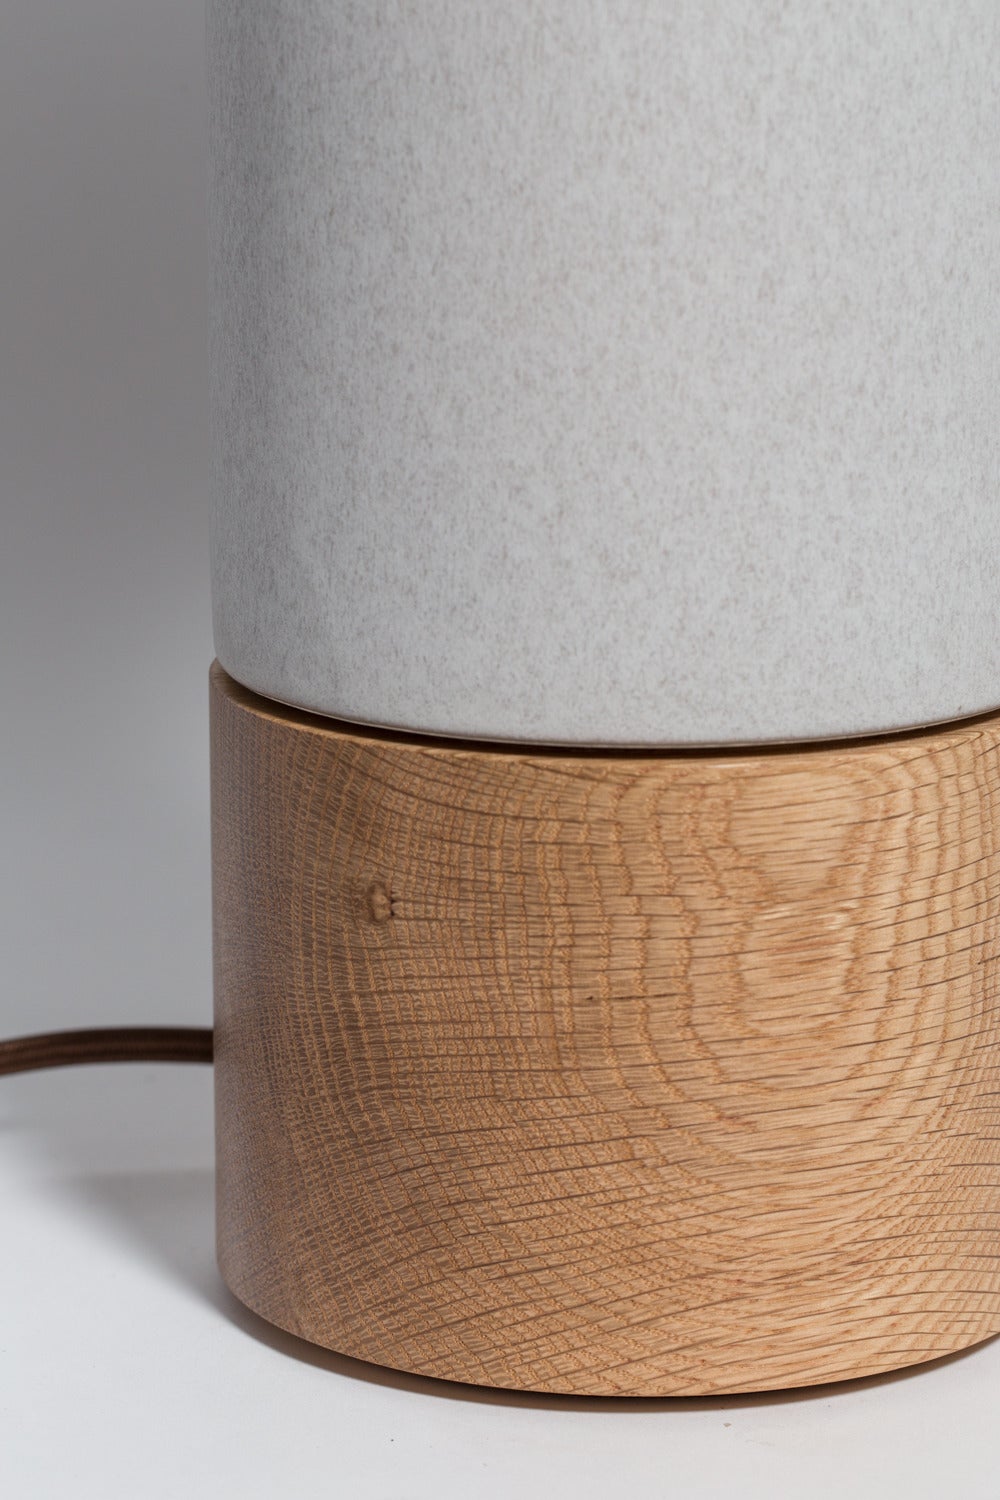 Short Baxter oak and ceramic table lamps, mfg. by Stone and Sawyer, exclusively for reGeneration. Mfg. in upstate New York. 